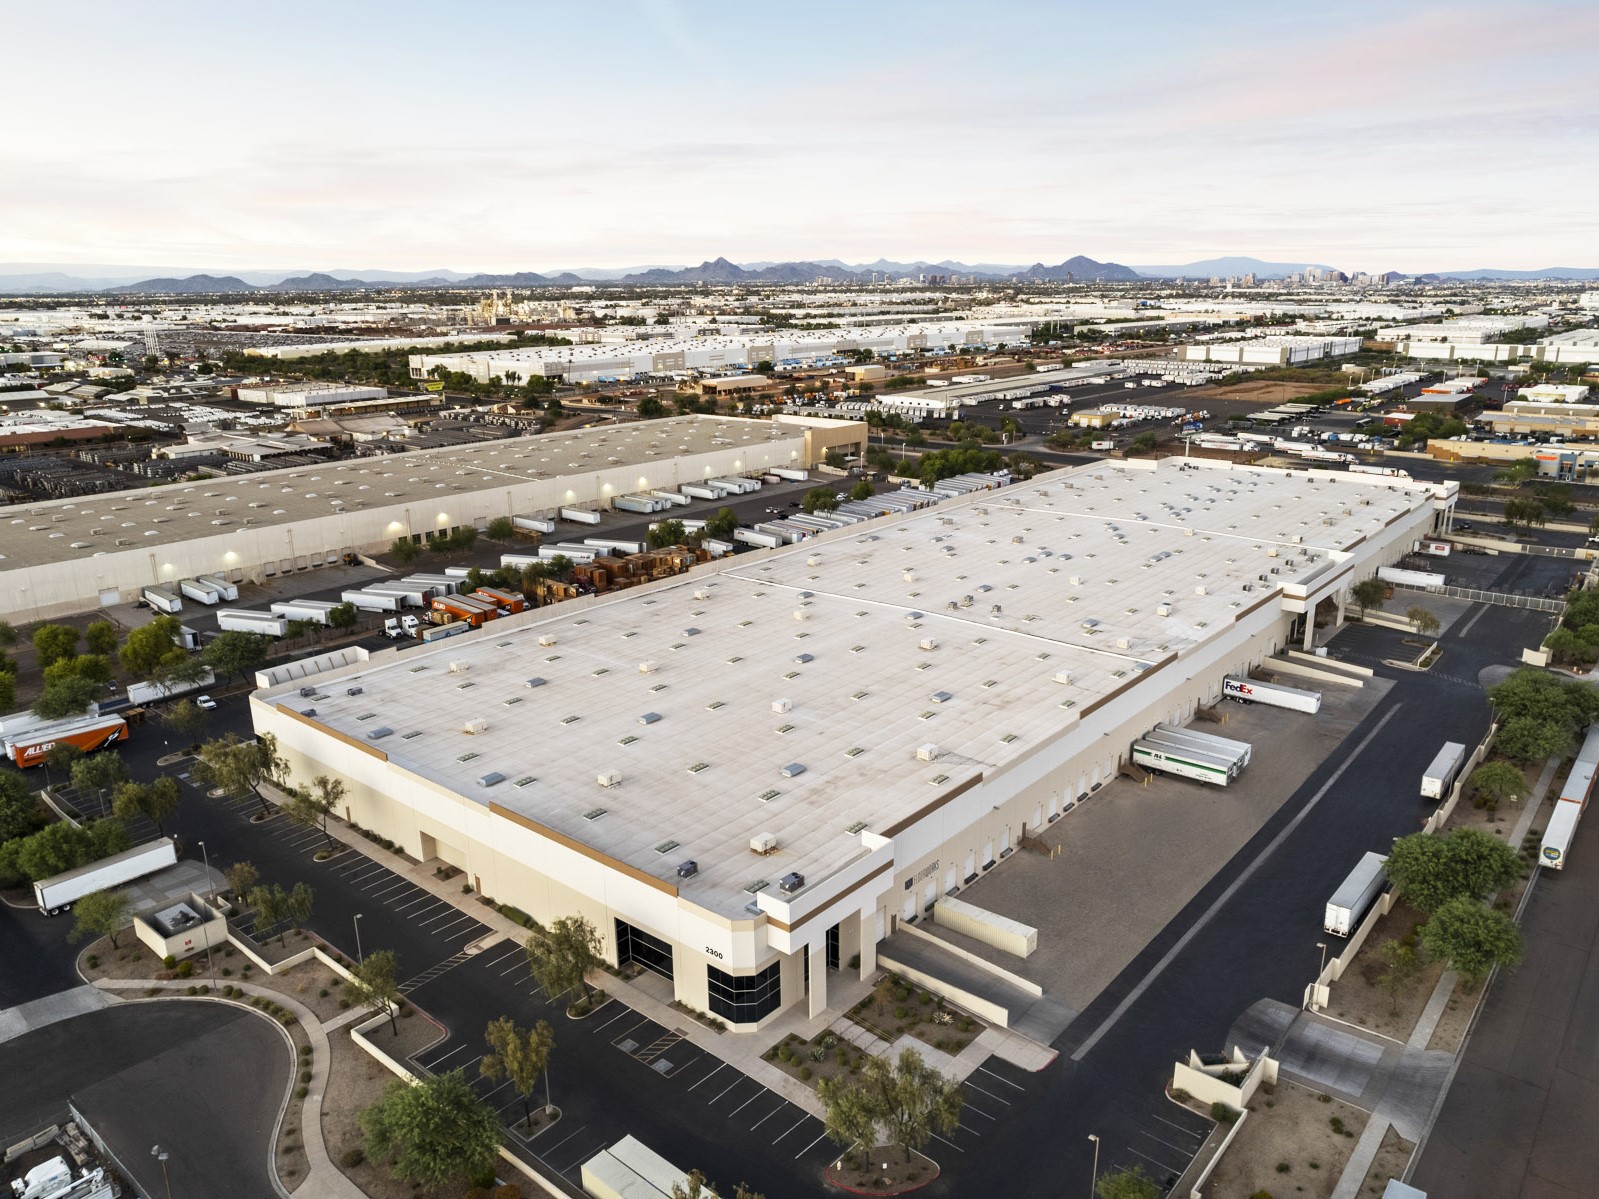 Riverside @ 51 is a 336,038-square-foot facility in Phoenix.